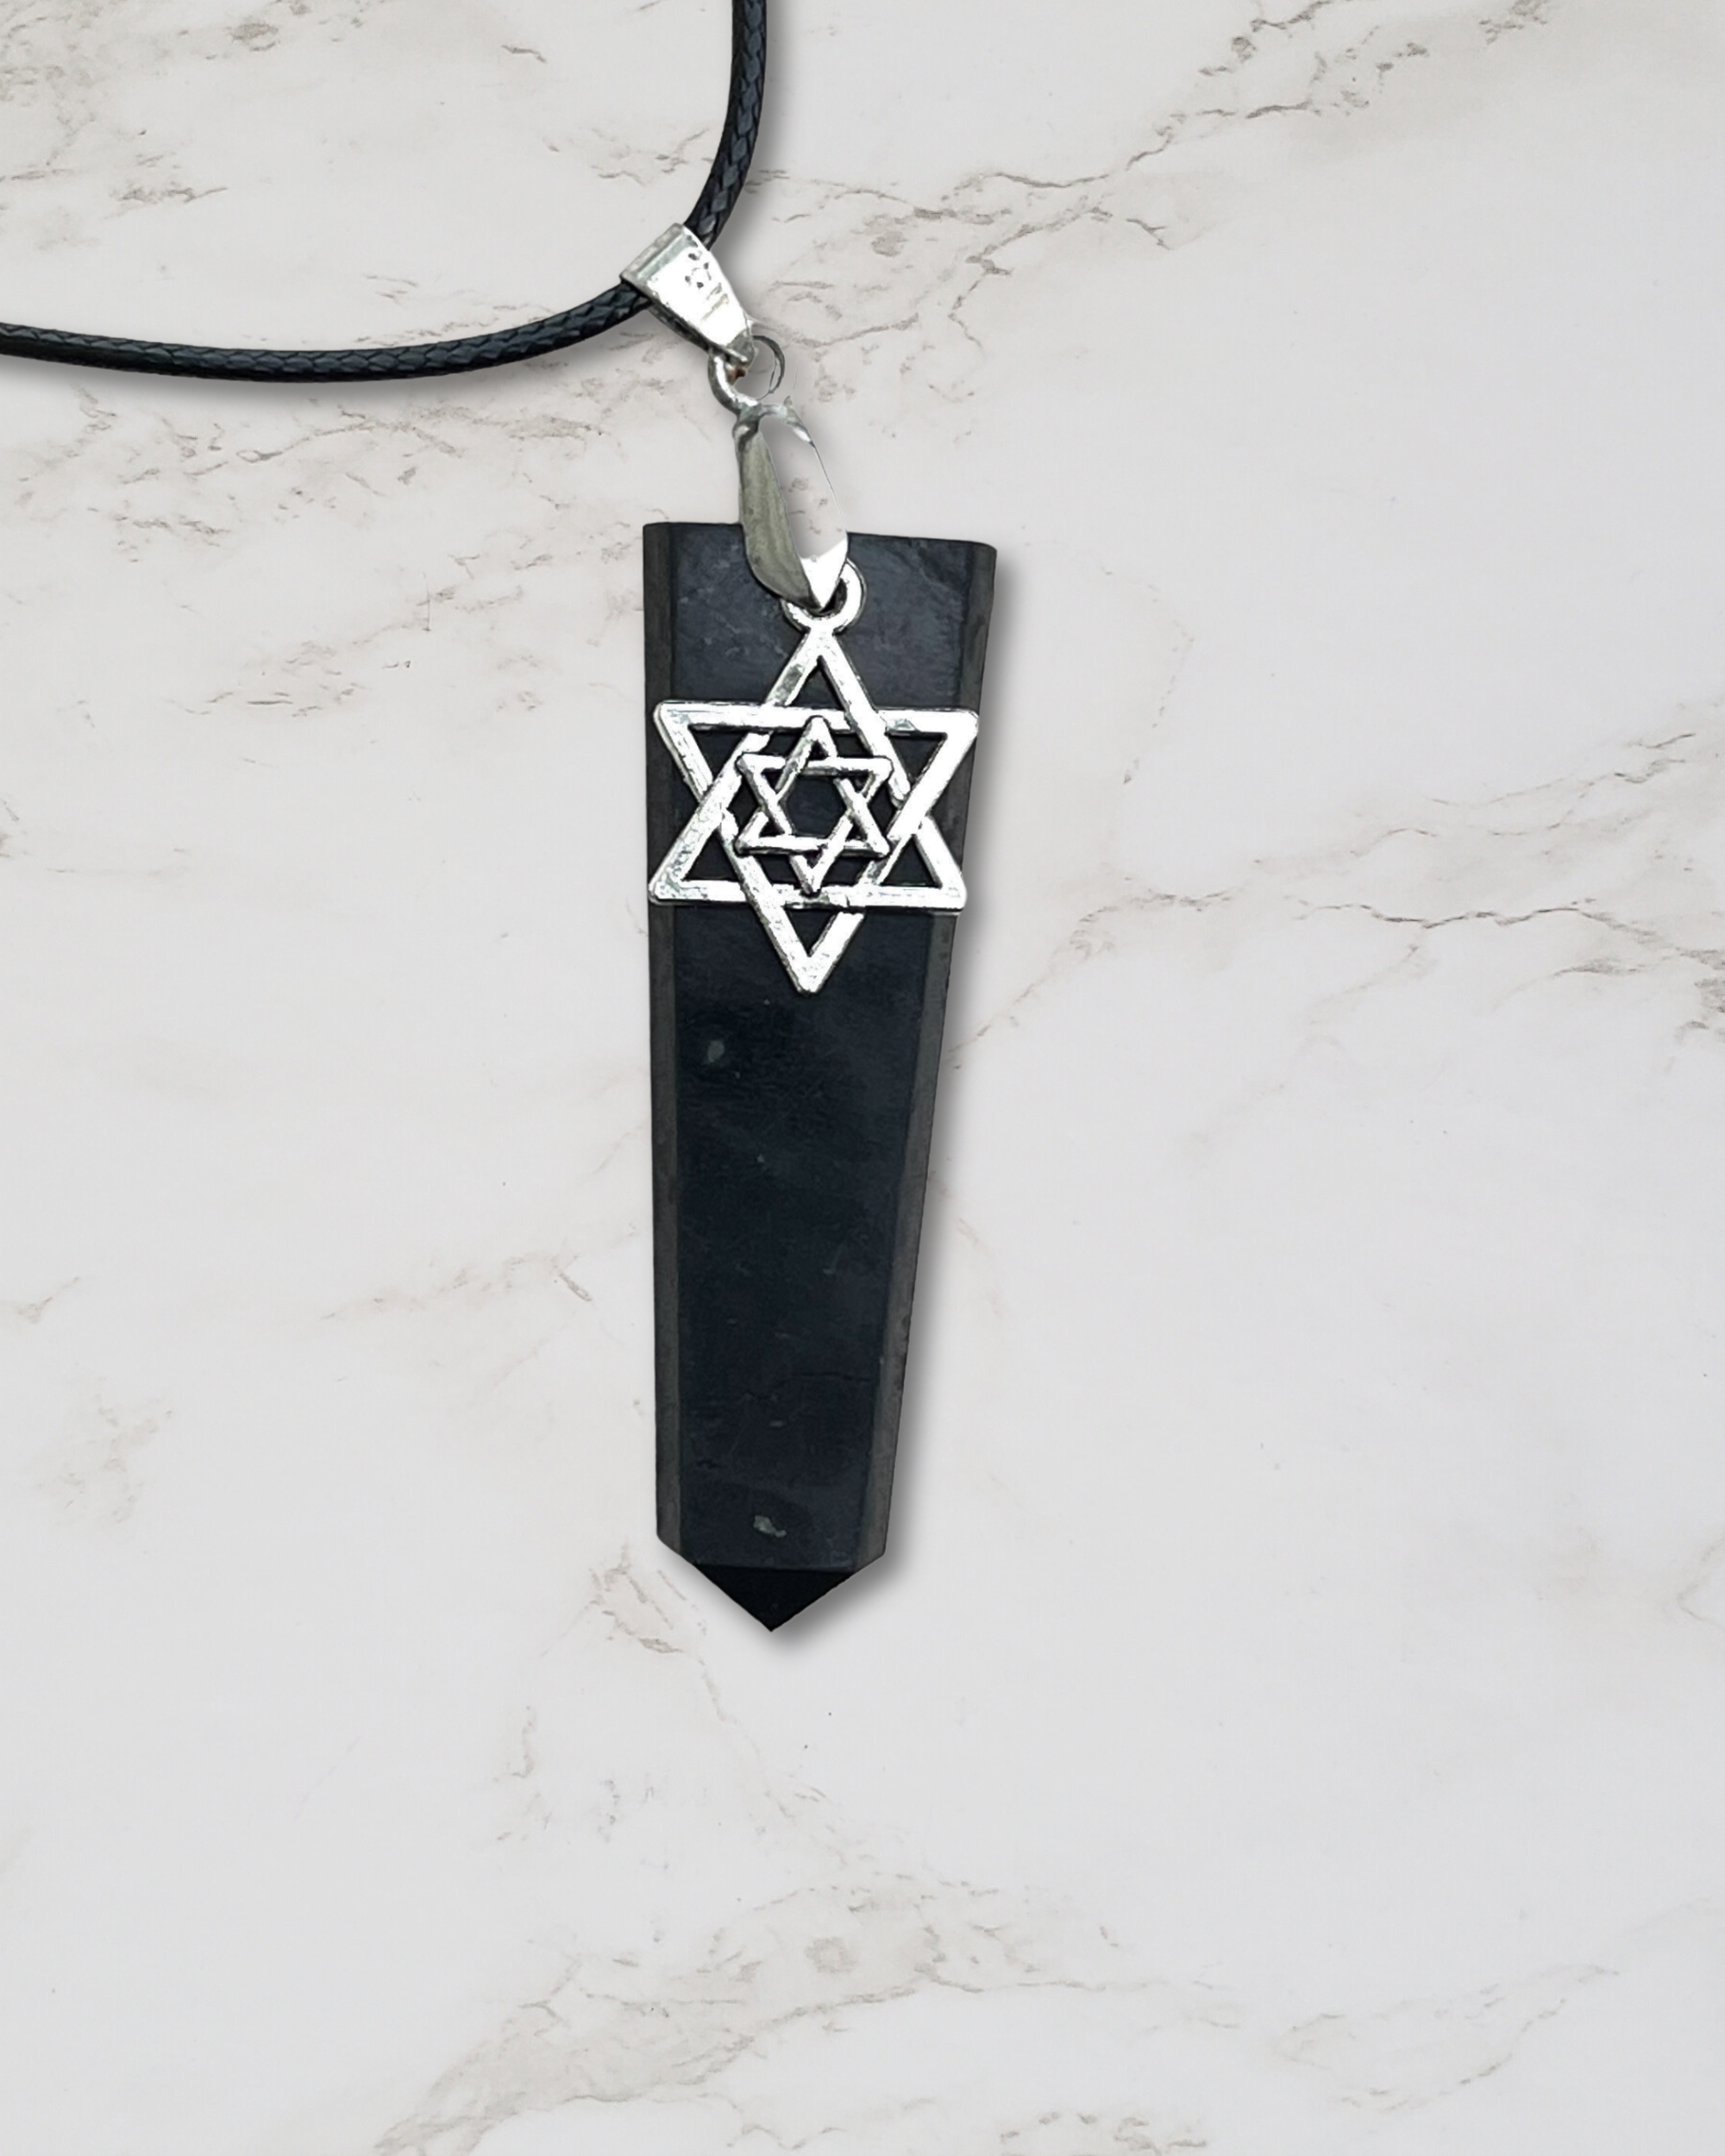 Frequency Jewelry Natural Pain Relief and Protection from 5G and EMFs Shungite Pendant Necklace with Star of David Charm